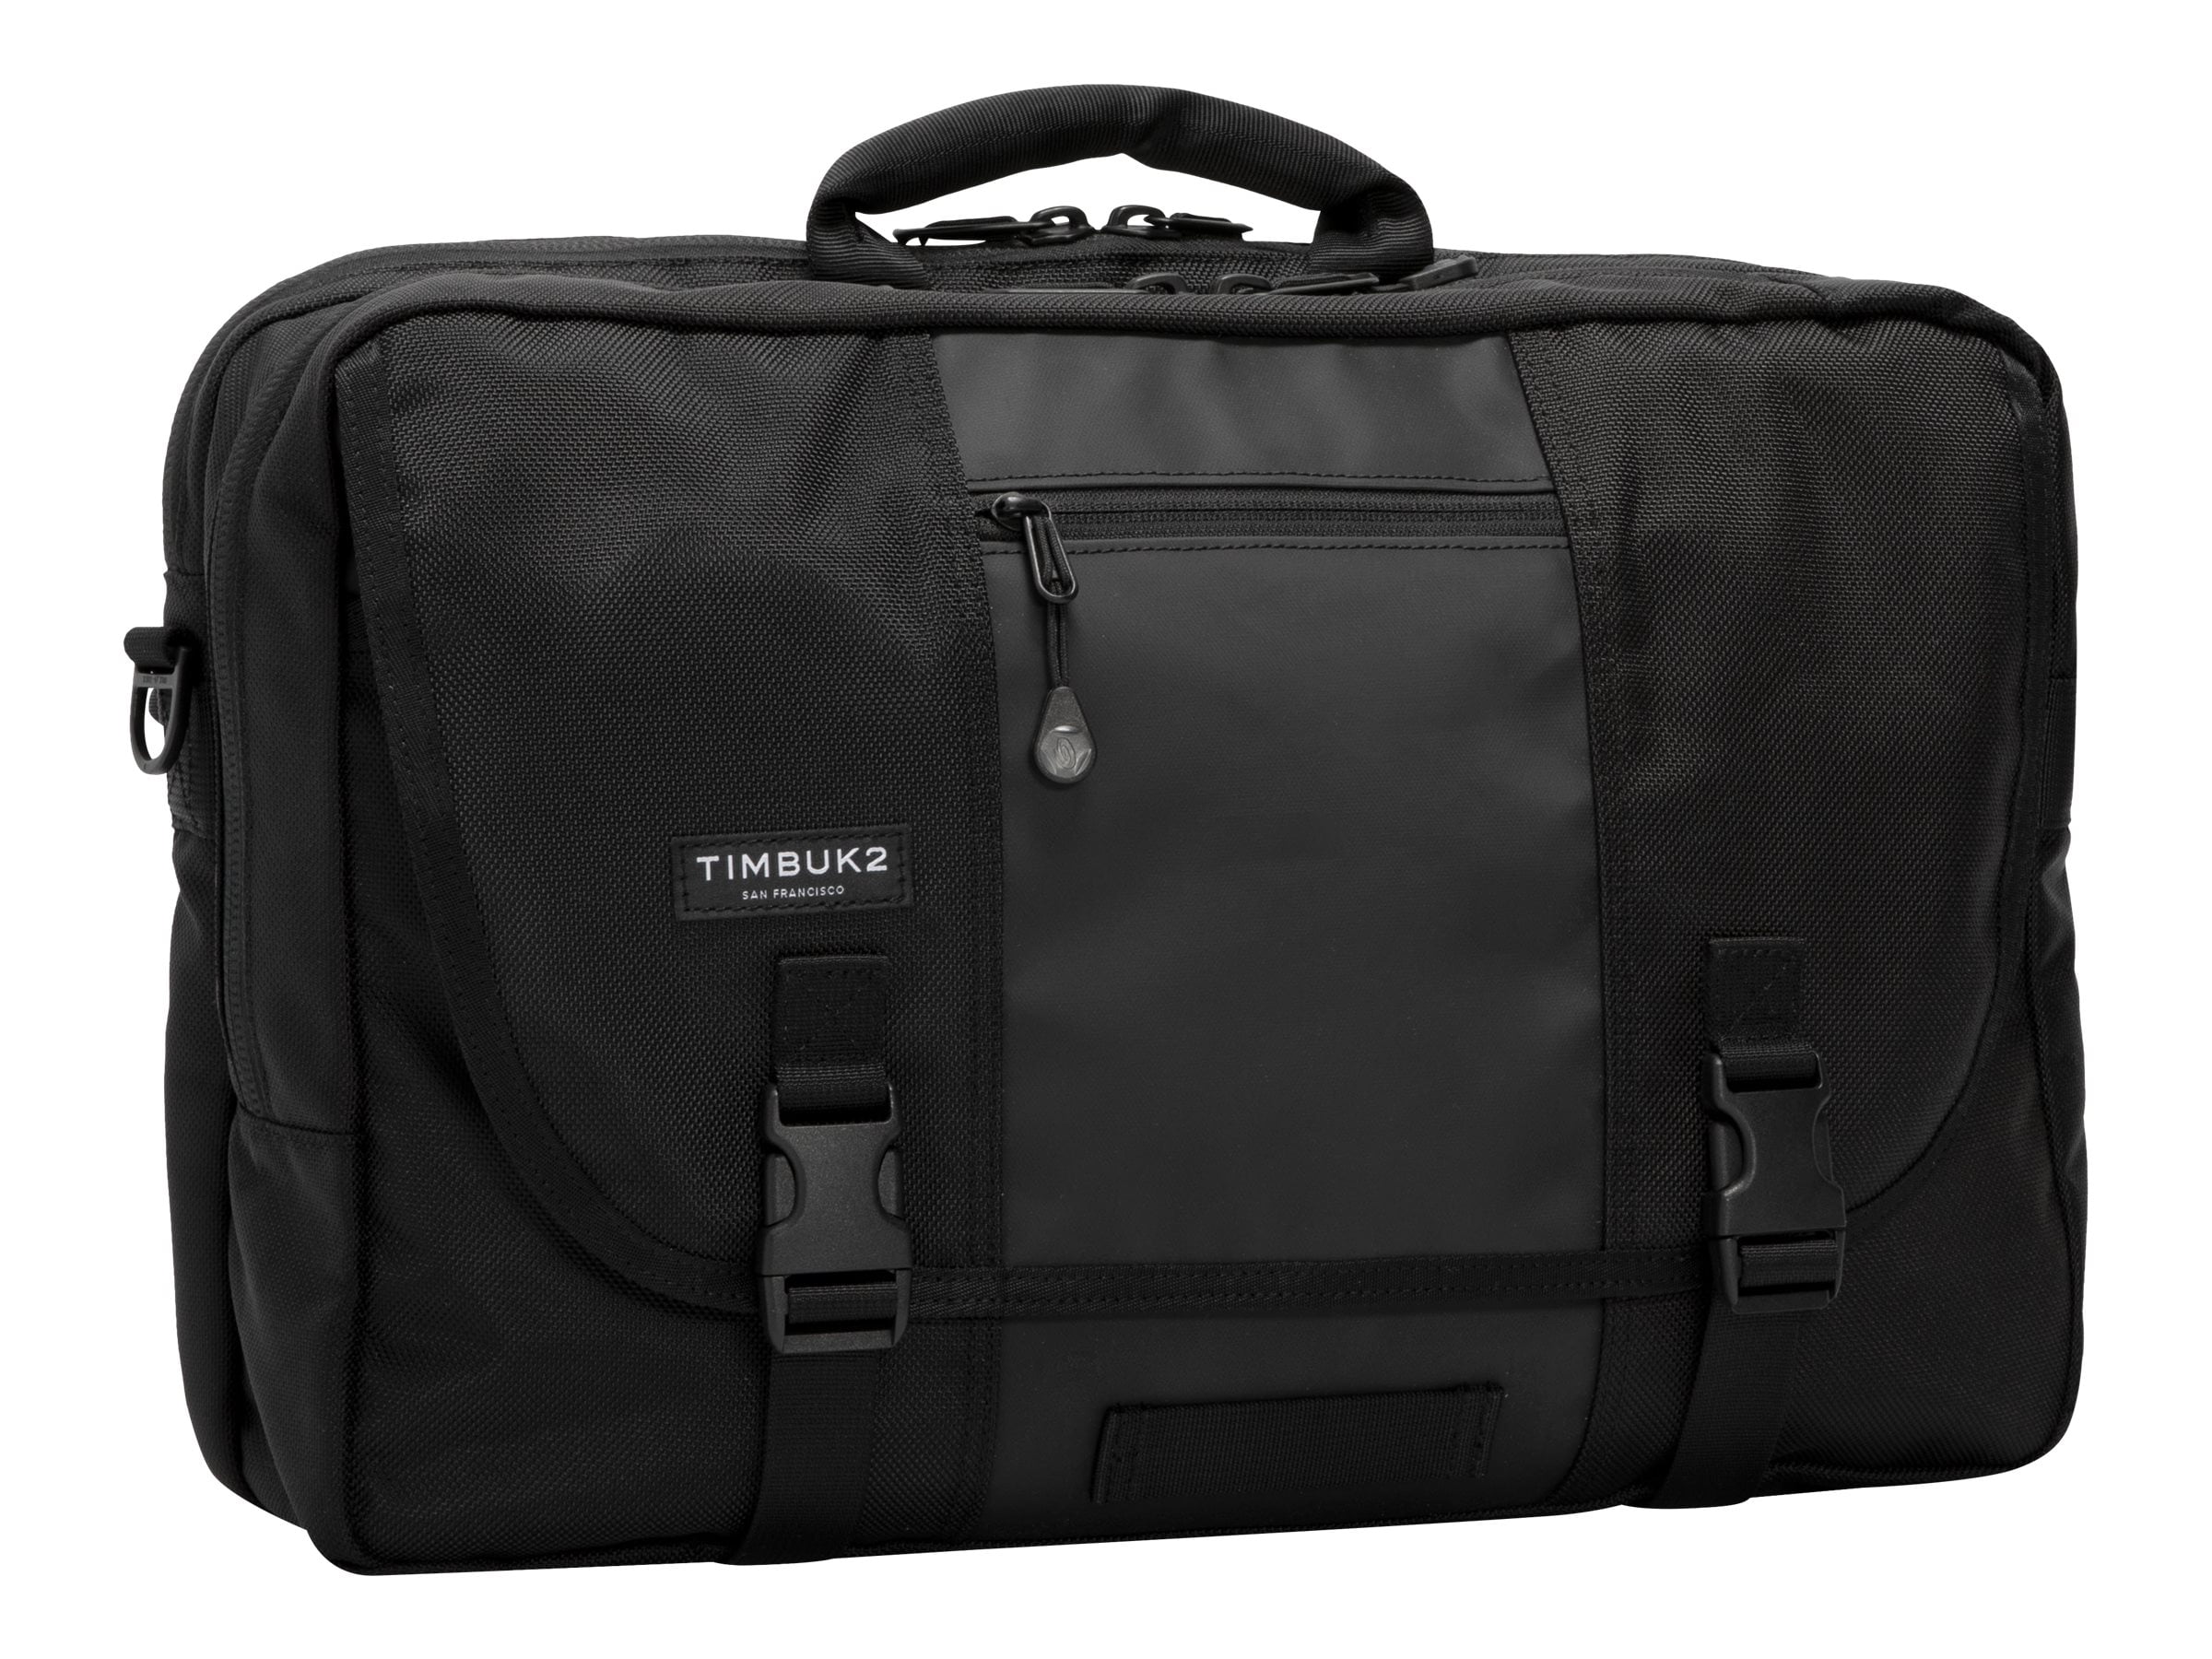 Timbuk2 3 in 1 Messenger Case - Notebook carrying case - 17